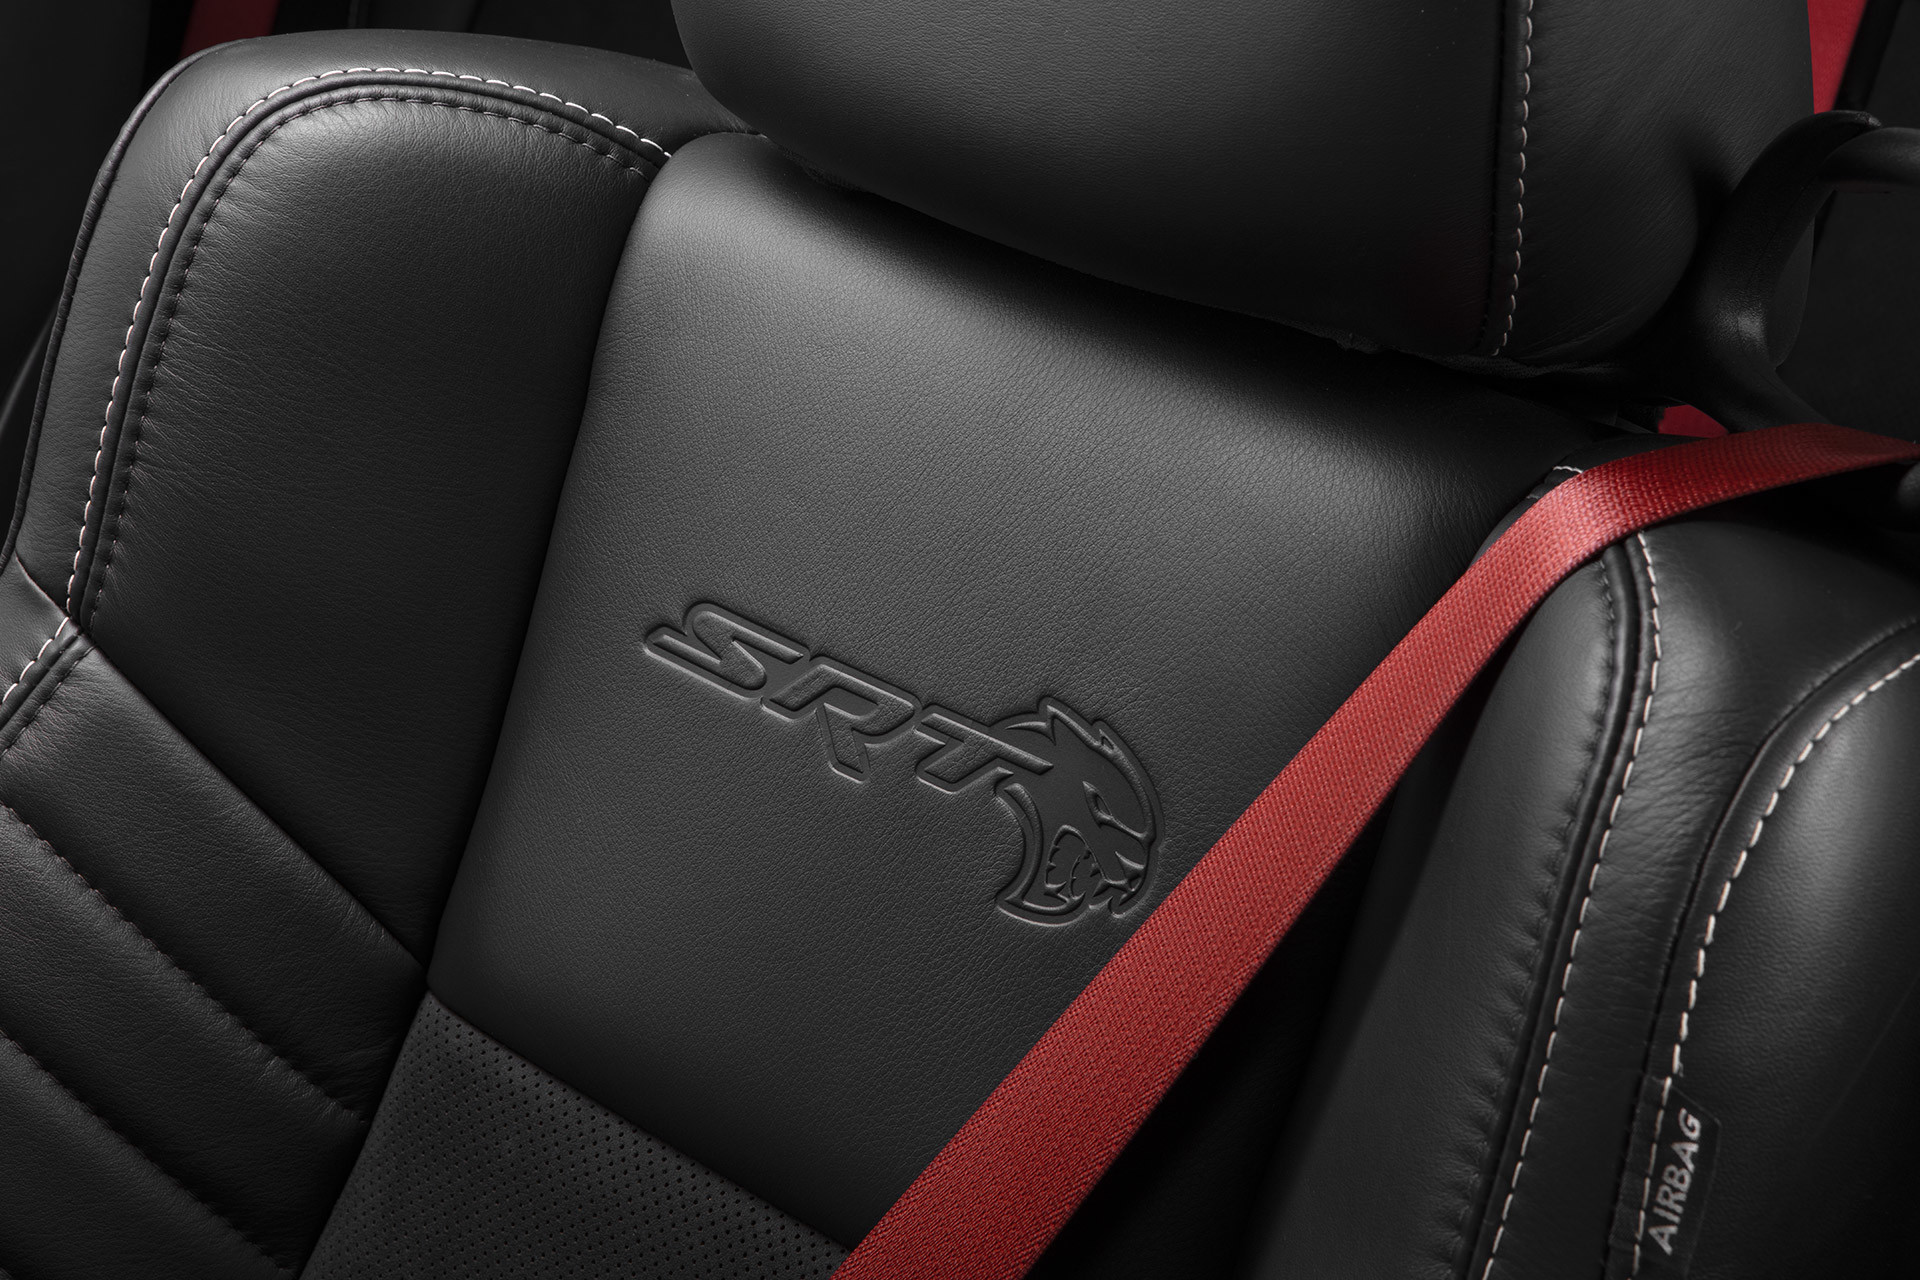 The SRT logo on the laguna leather seats of a 2022 Dodge Challenger.